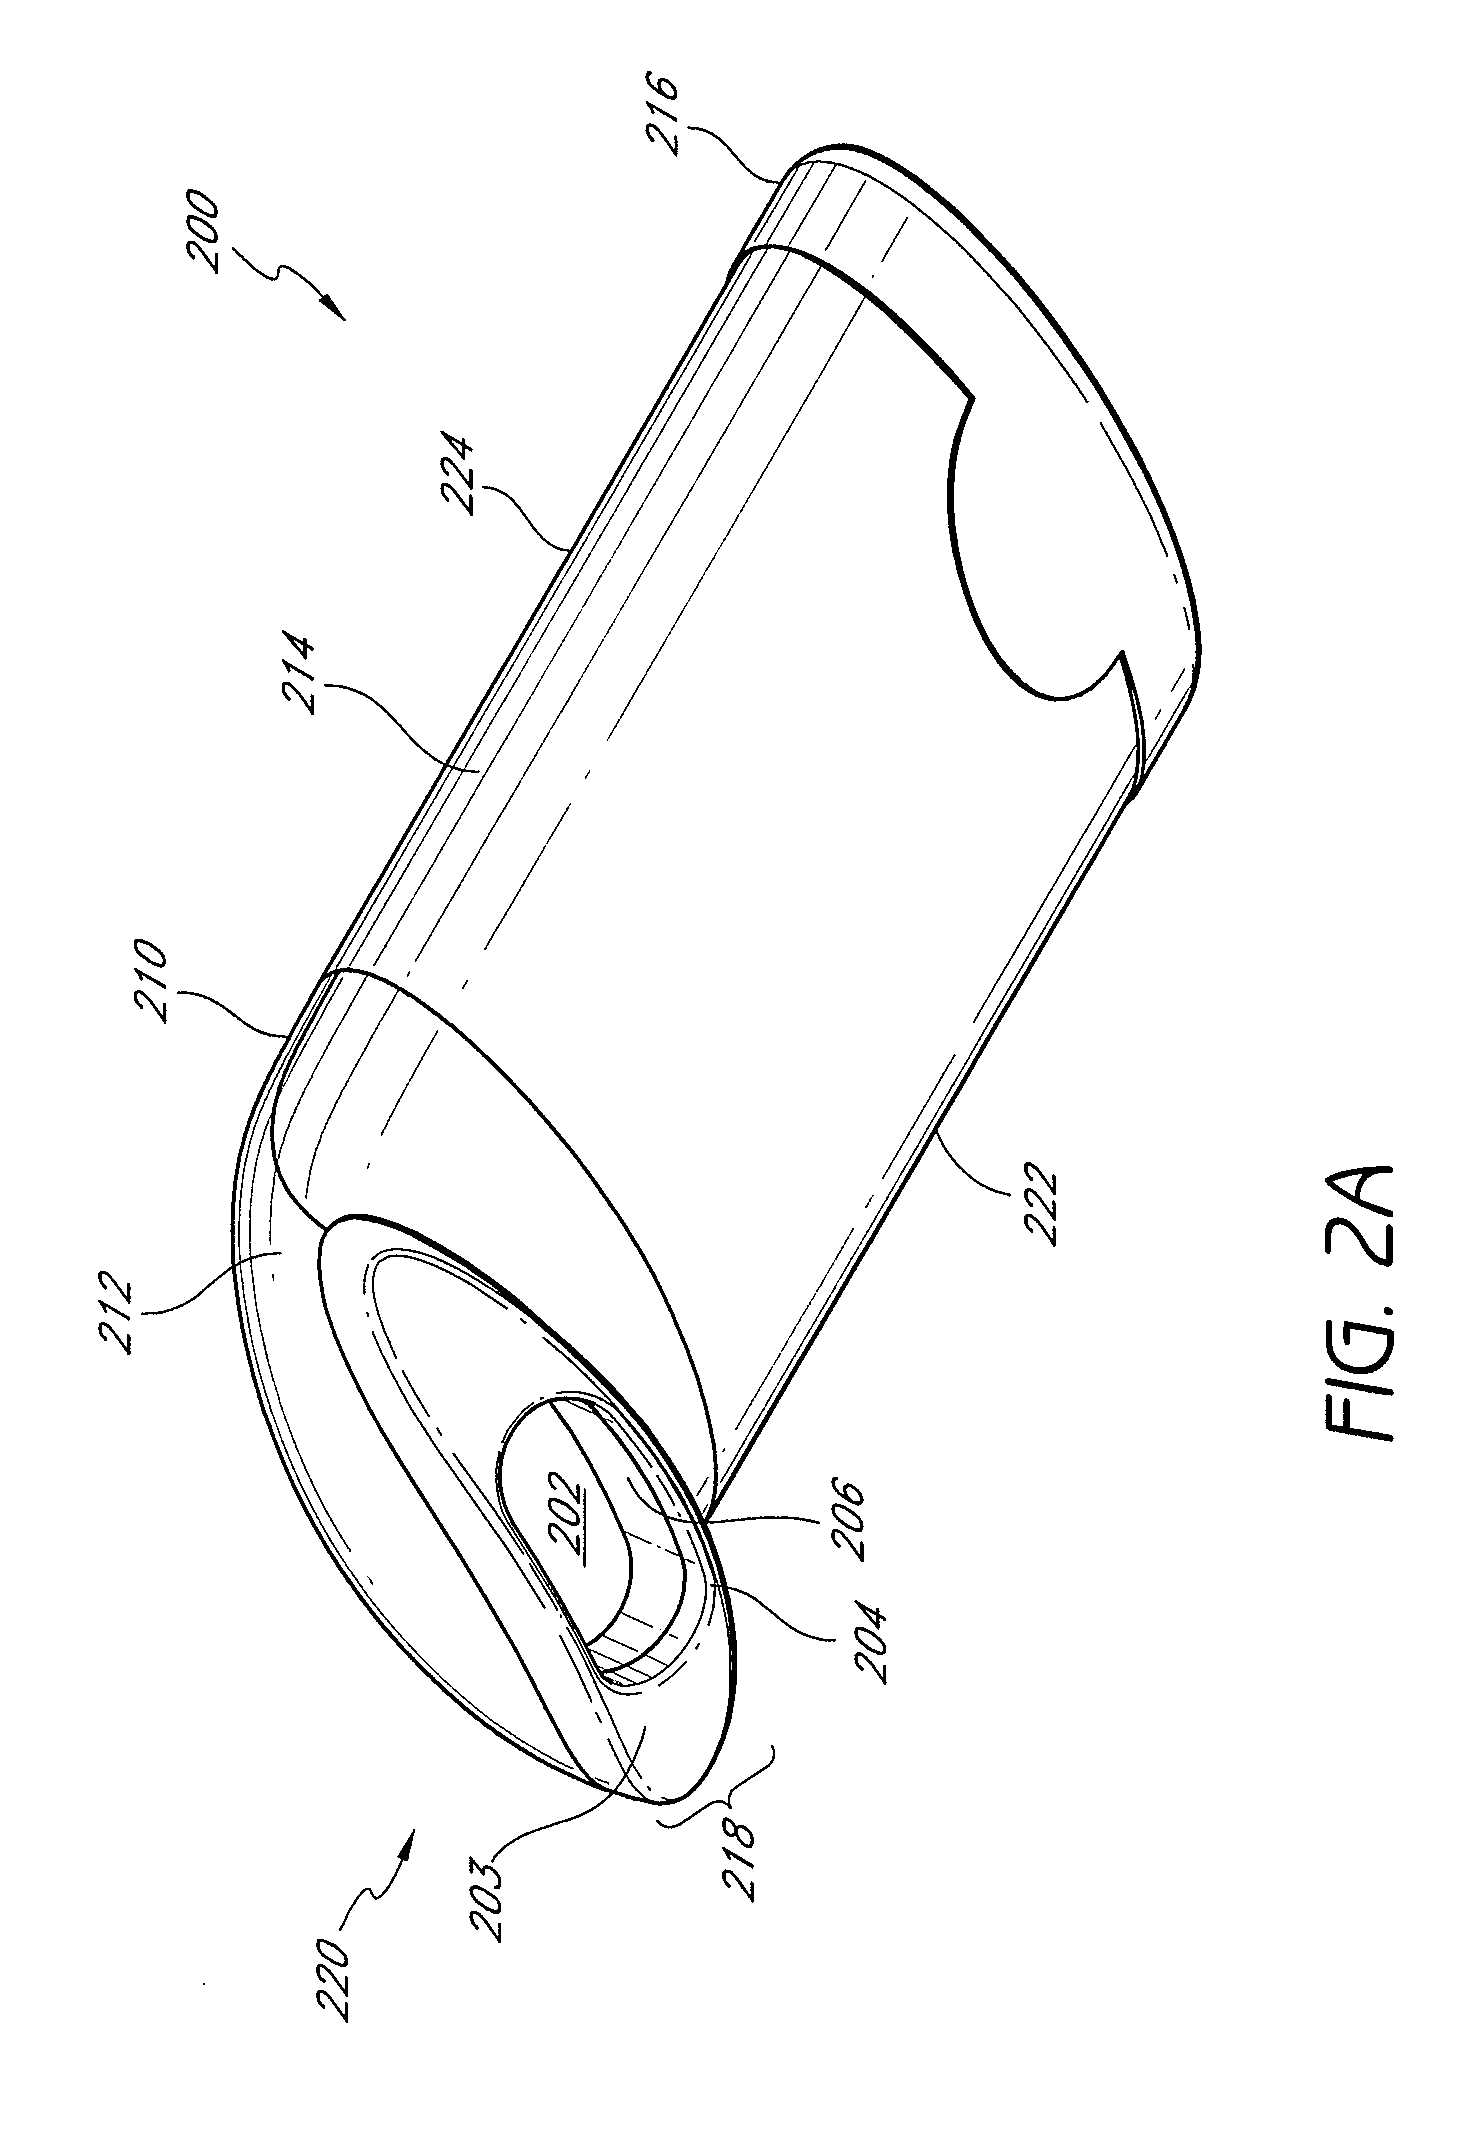 Light emitting therapeutic devices and methods